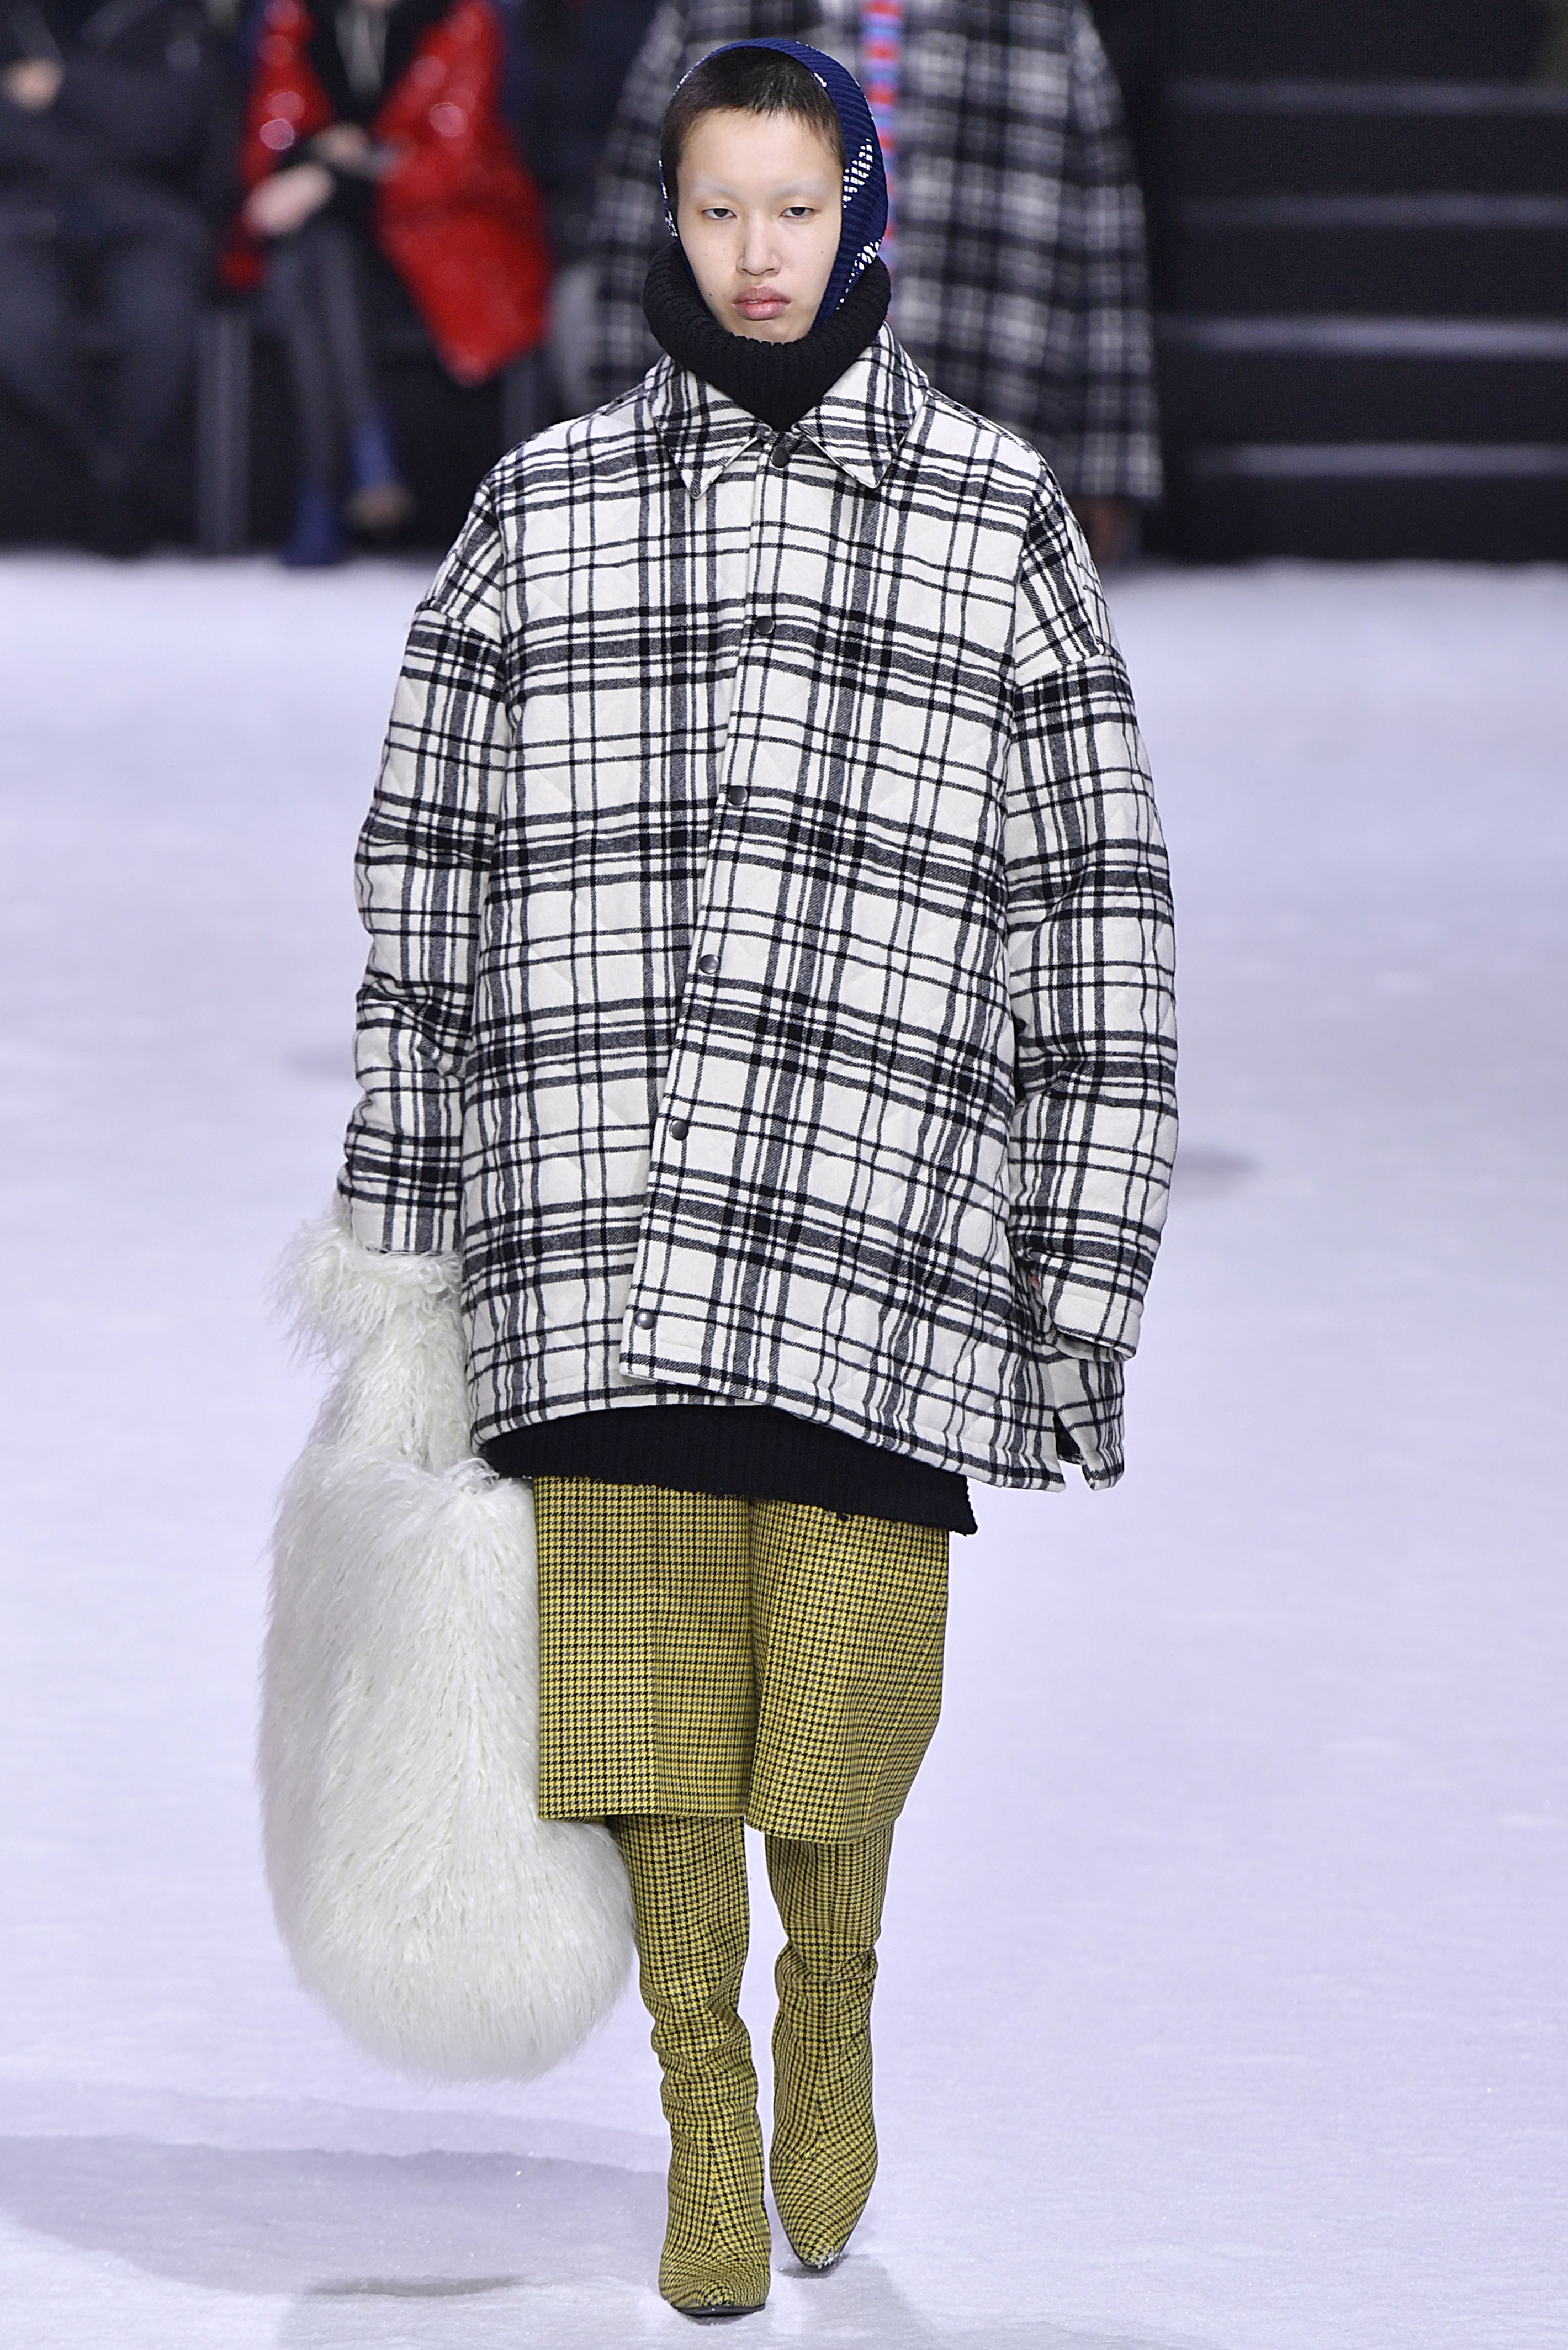 How Demna Gvasalia's Giant Puffers Were an Awesome Homage to